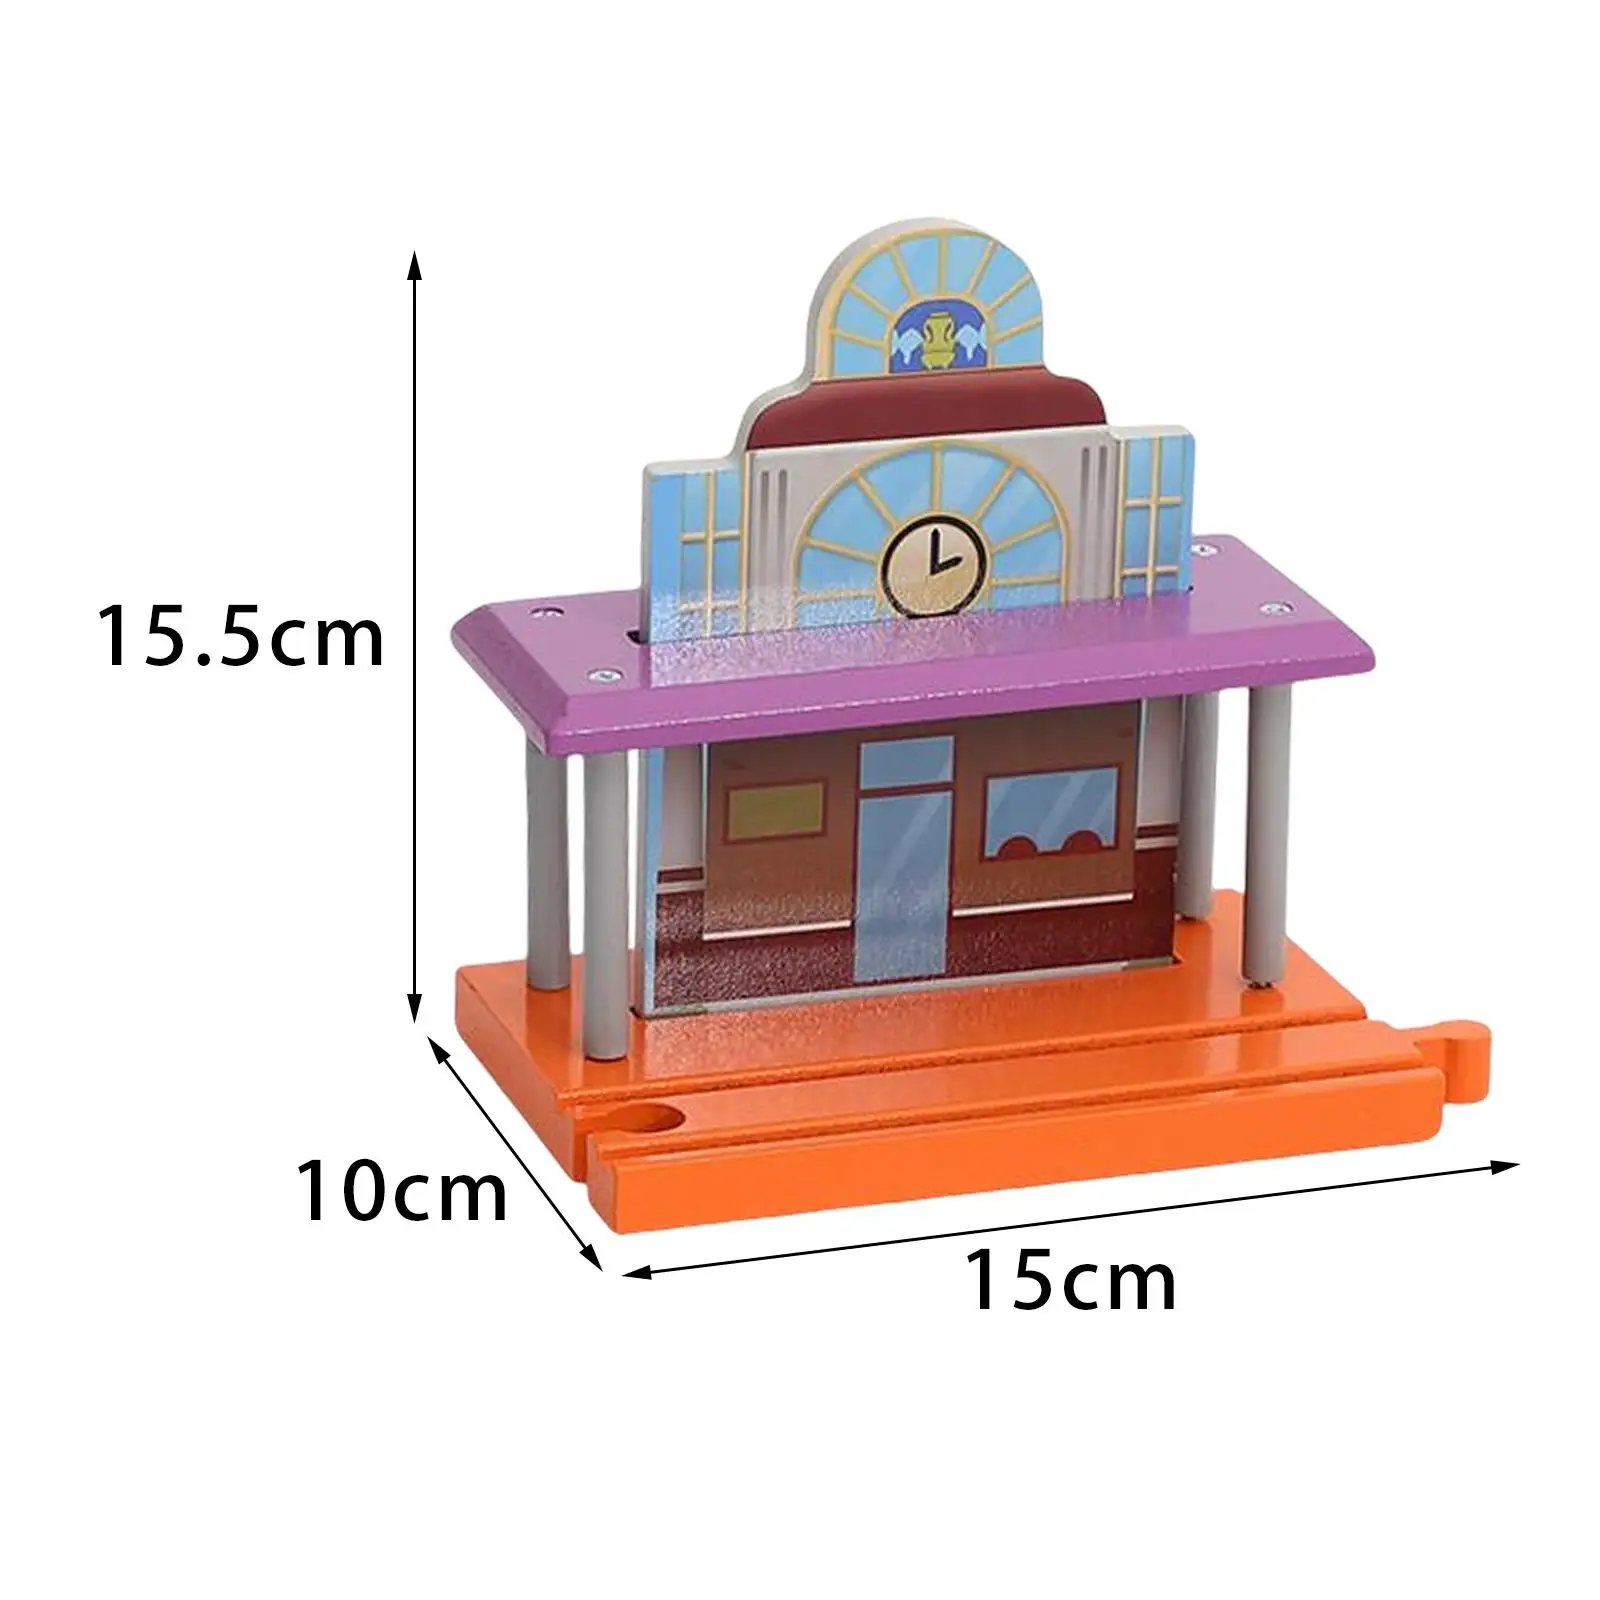 Rail Wooden Railway Station Track Accessories Landscape Educational for Children Kids New Year Gifts